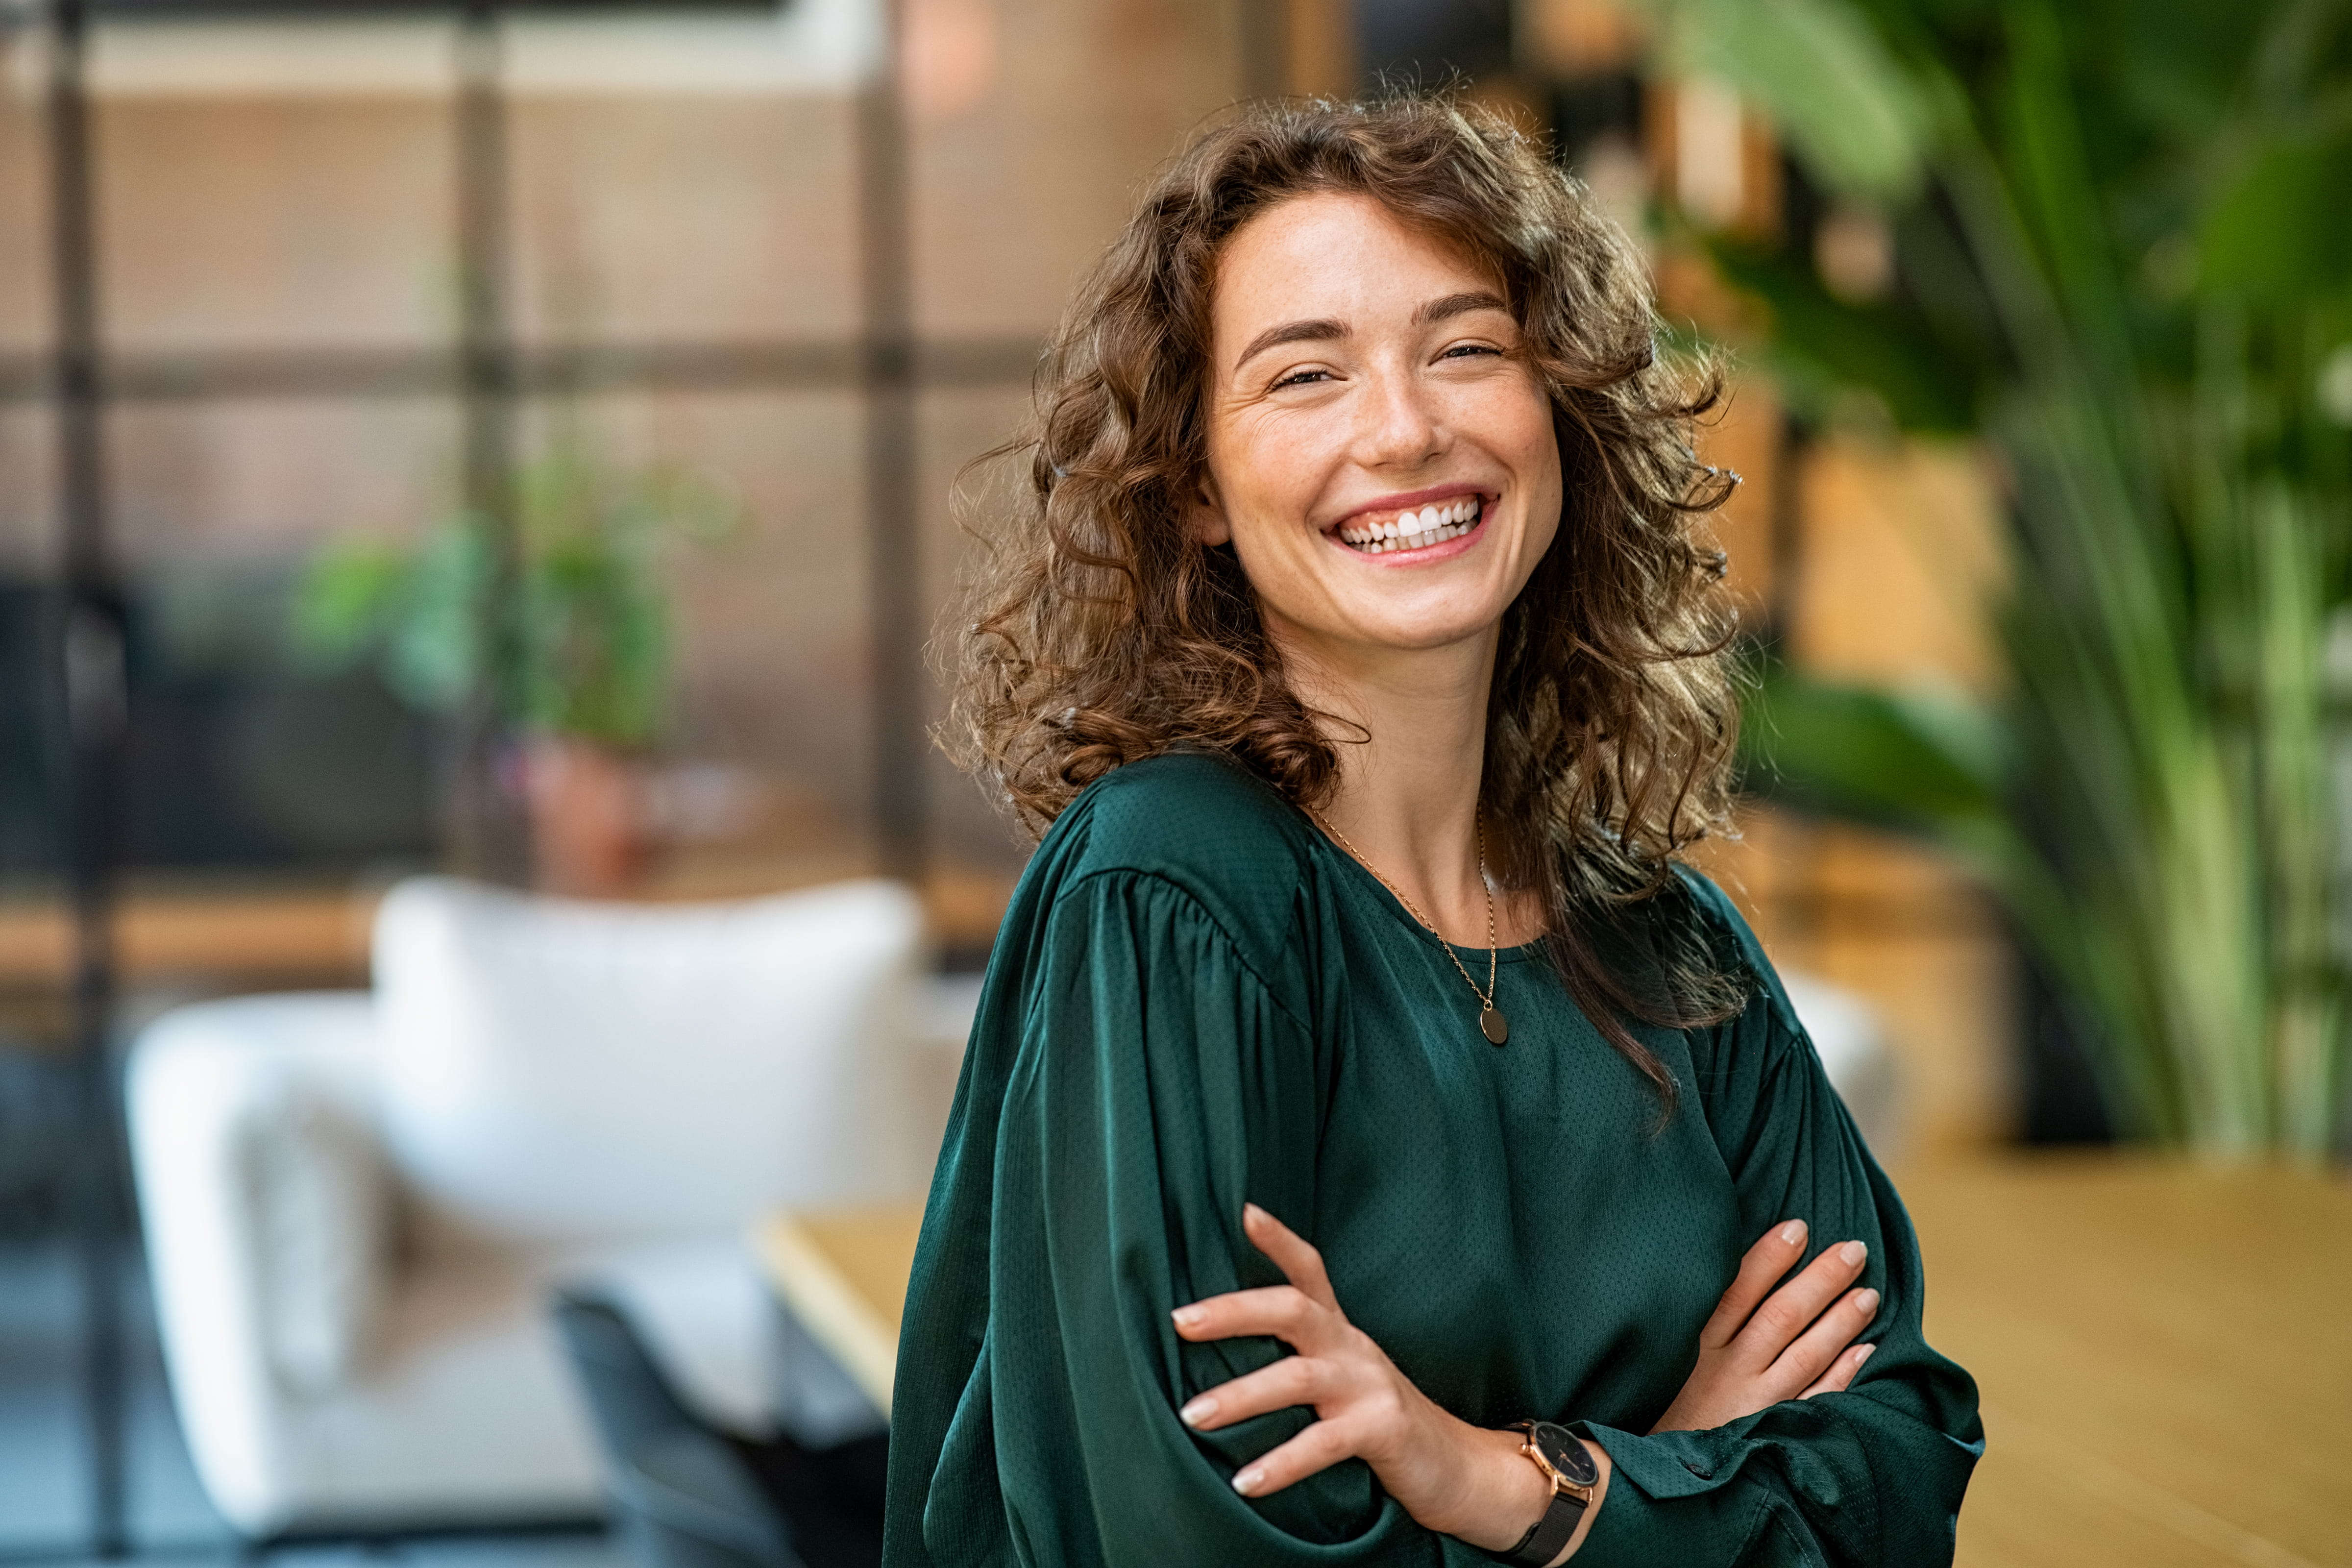 Confident curly haired woman smiling with arm crossed.